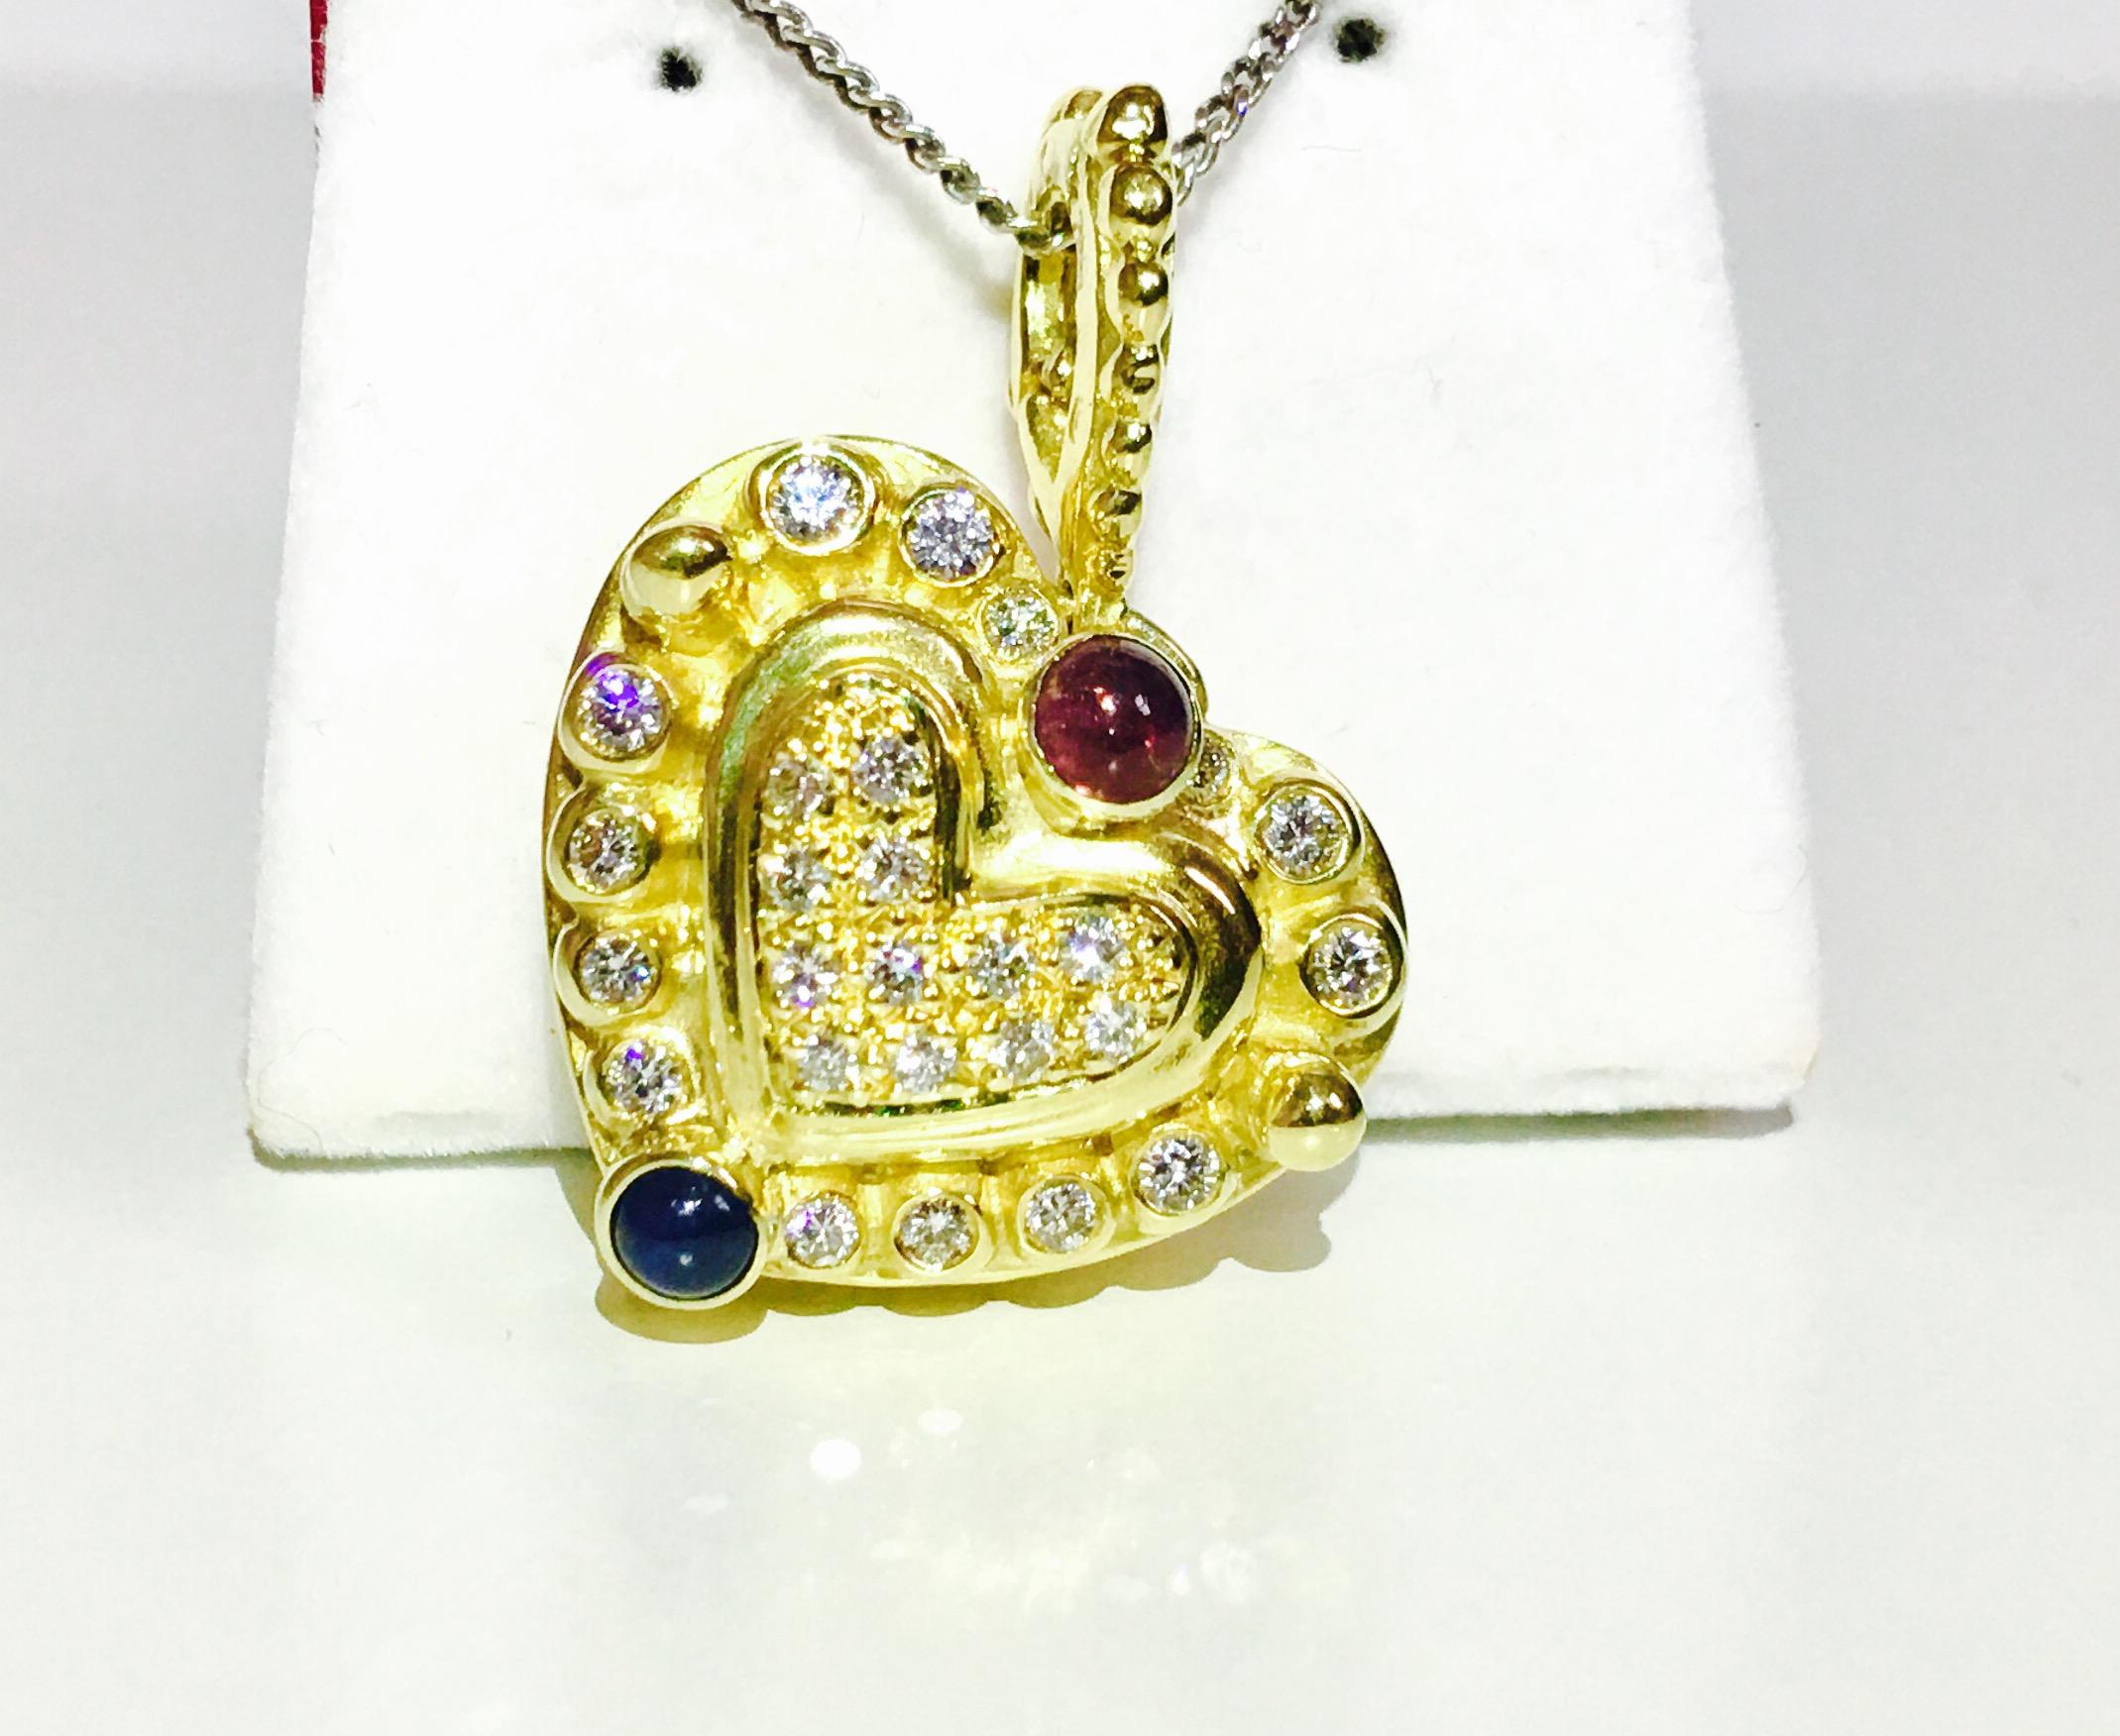 Vintage Ruby Sapphire Diamond Heart Shaped Pendant, 18 Karat Gold In Excellent Condition For Sale In Miami, FL